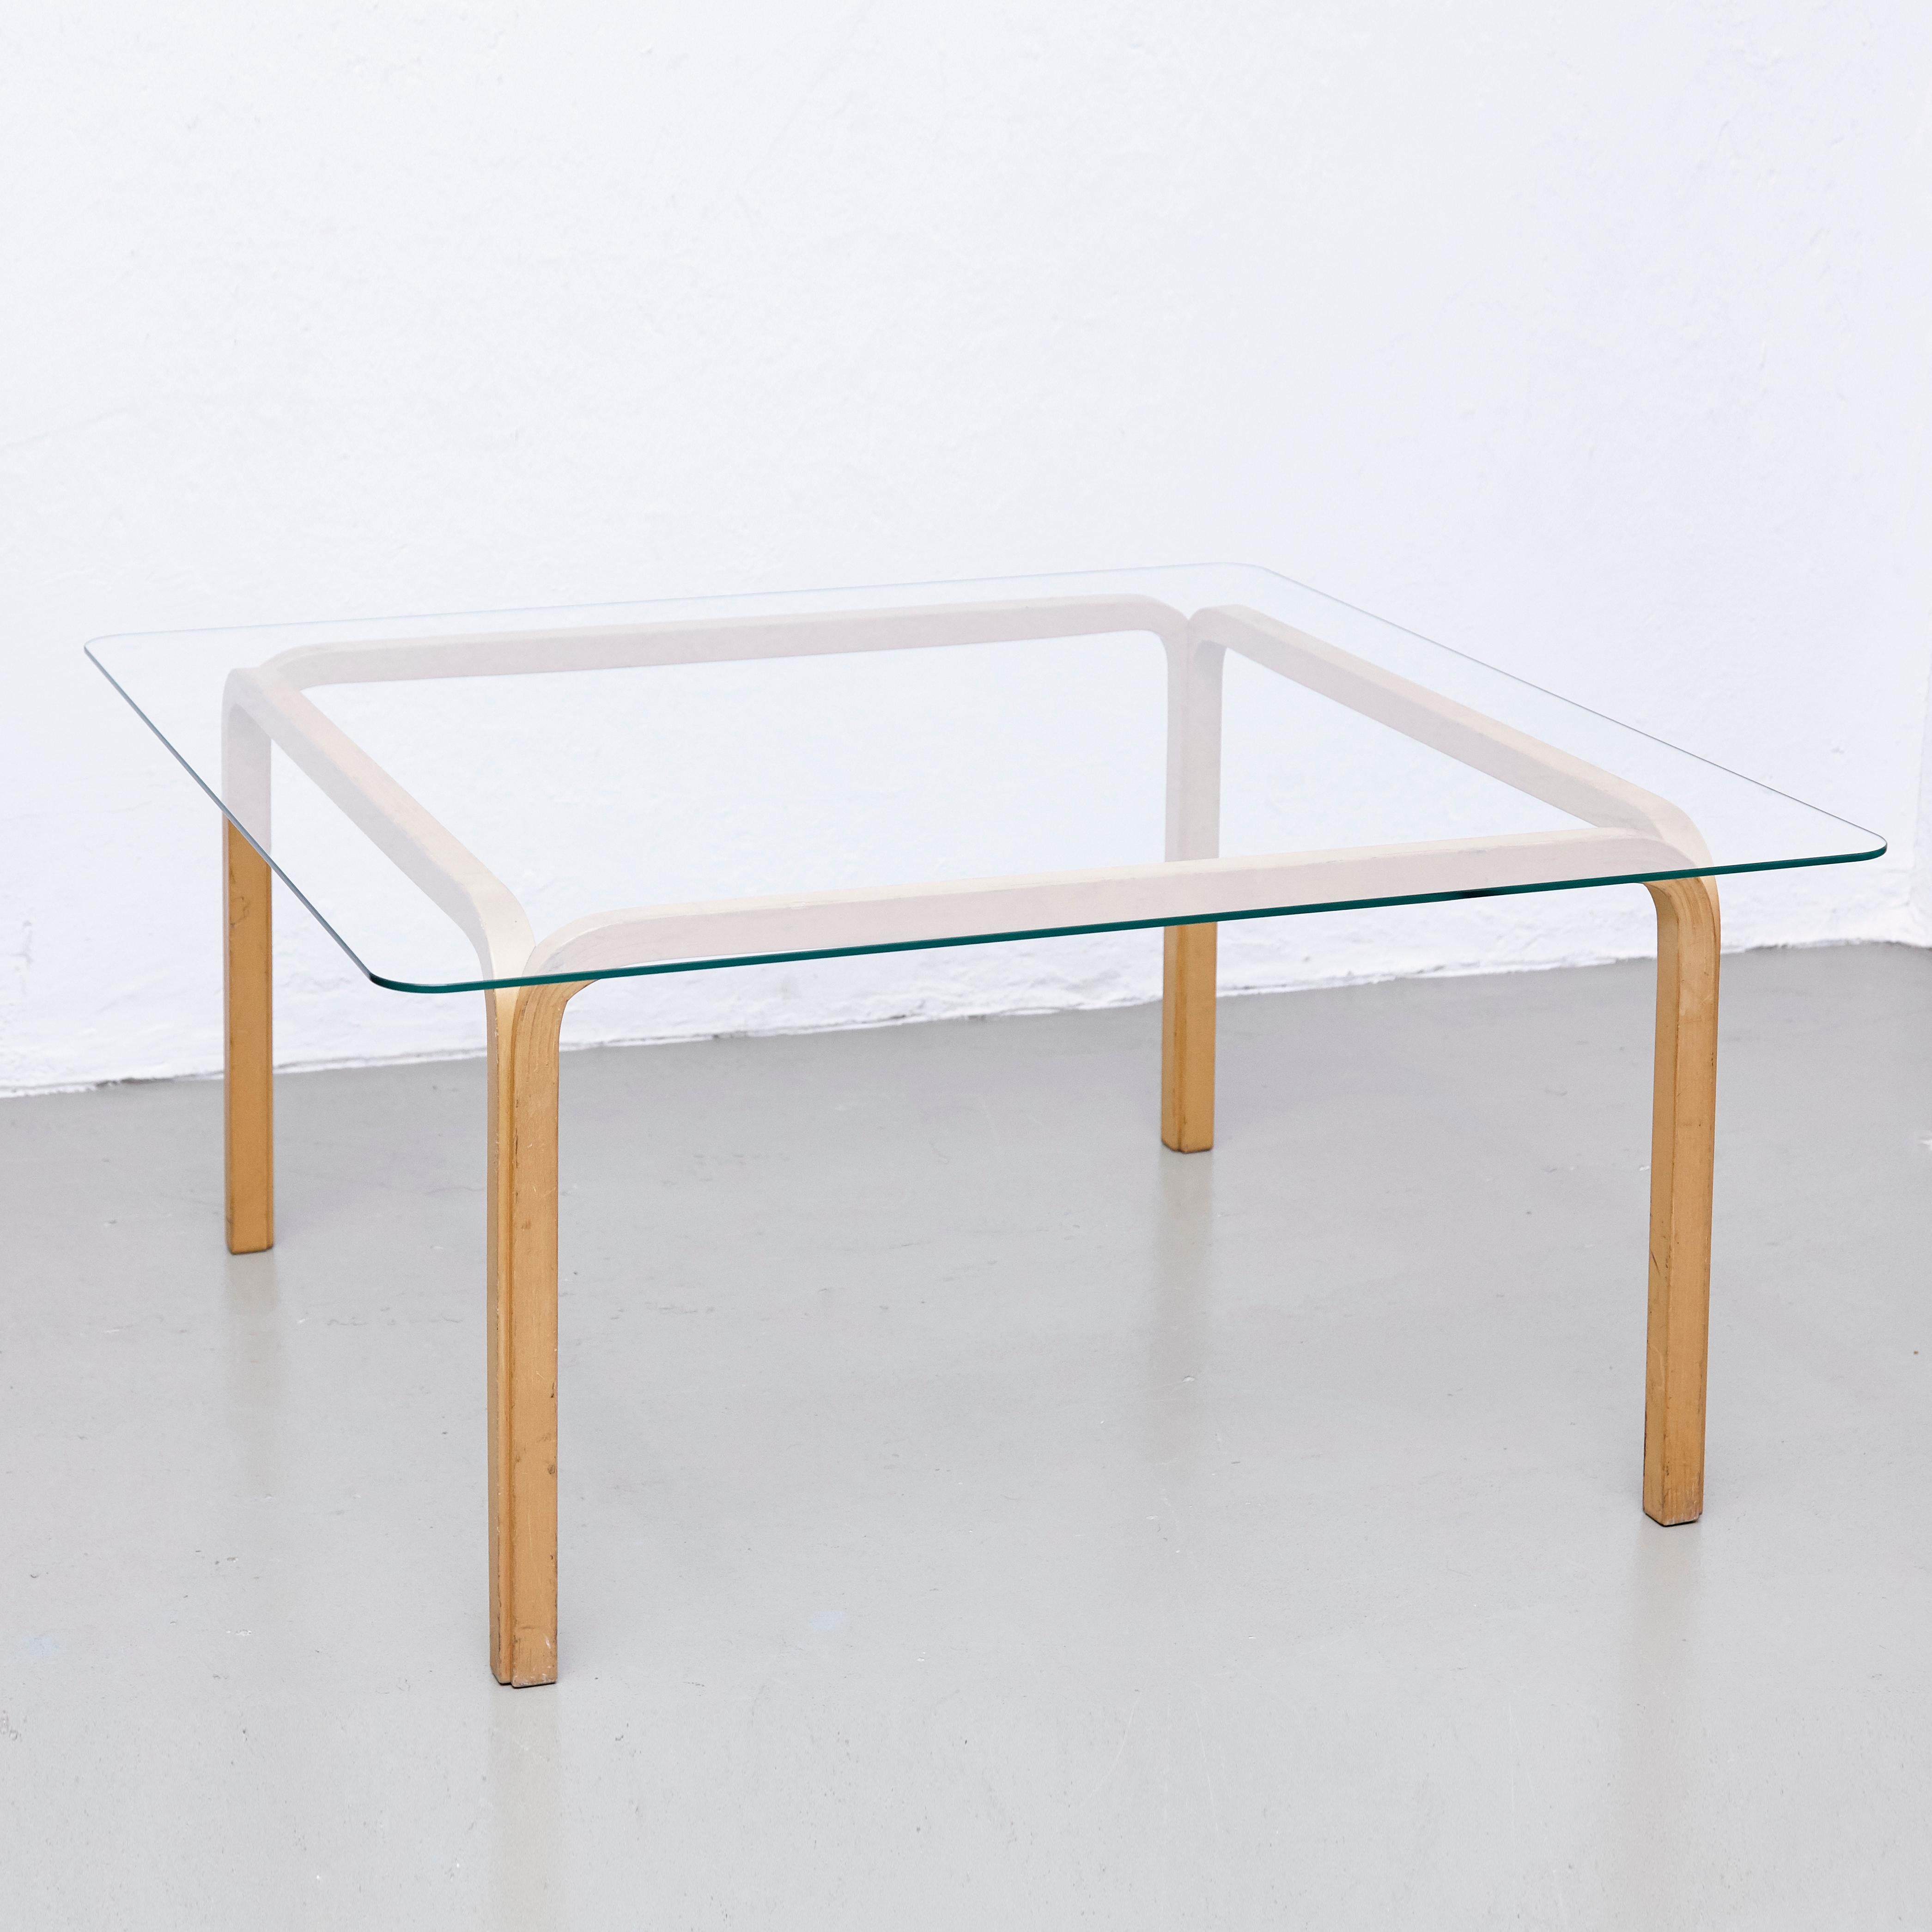 Table Y805A designed by Alvar Aalto, circa 1980 for Artek.

Wood legs and glass.

In great original condition, with minor wear consistent with age and use, preserving a beautiful patina.

Hugo Alvar Henrik Aalto (1898-1976) was a Finnish